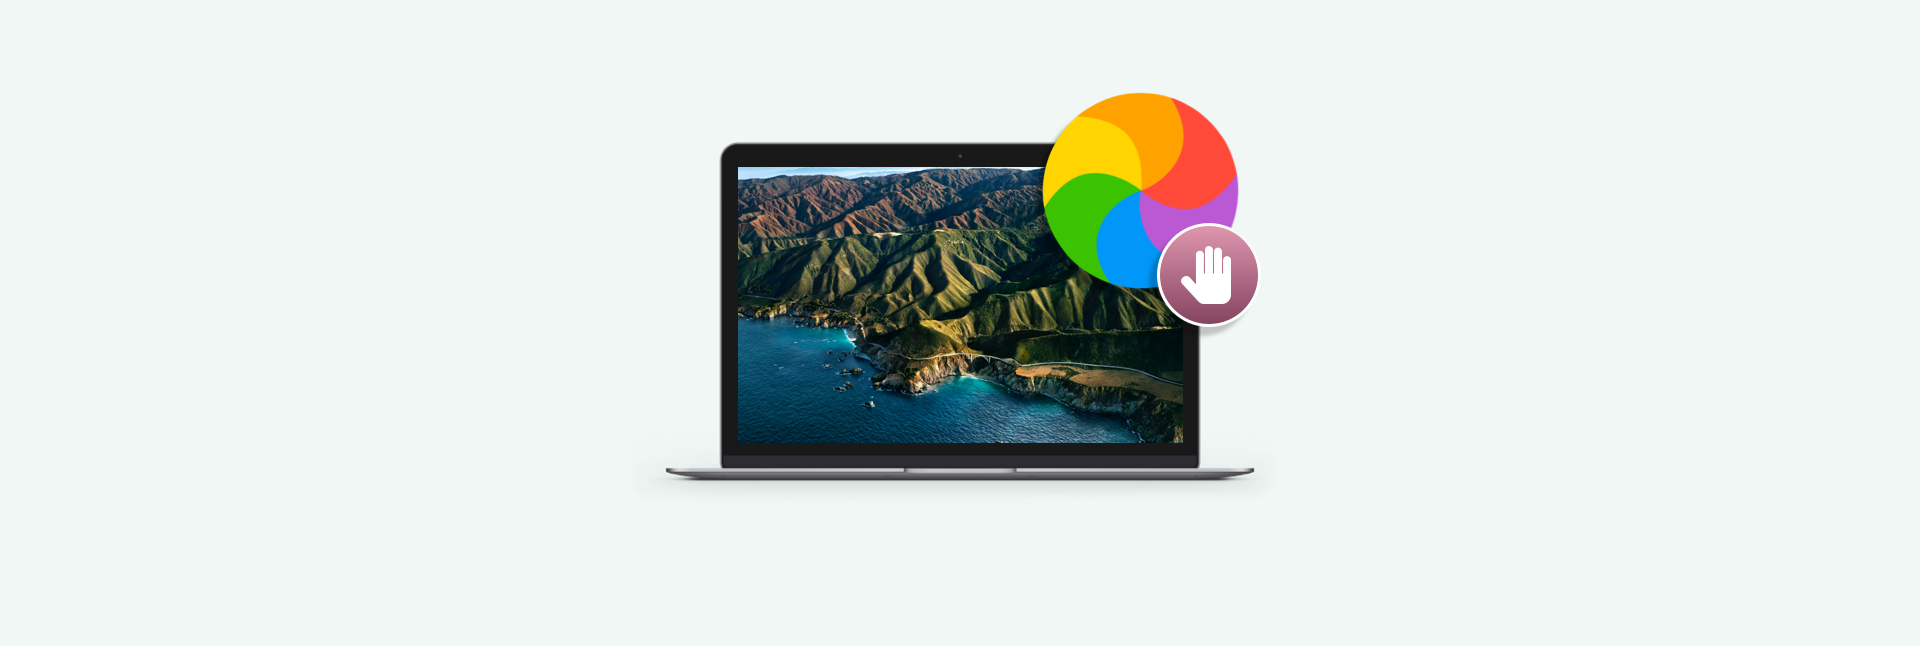 apple computer spinning color wheel